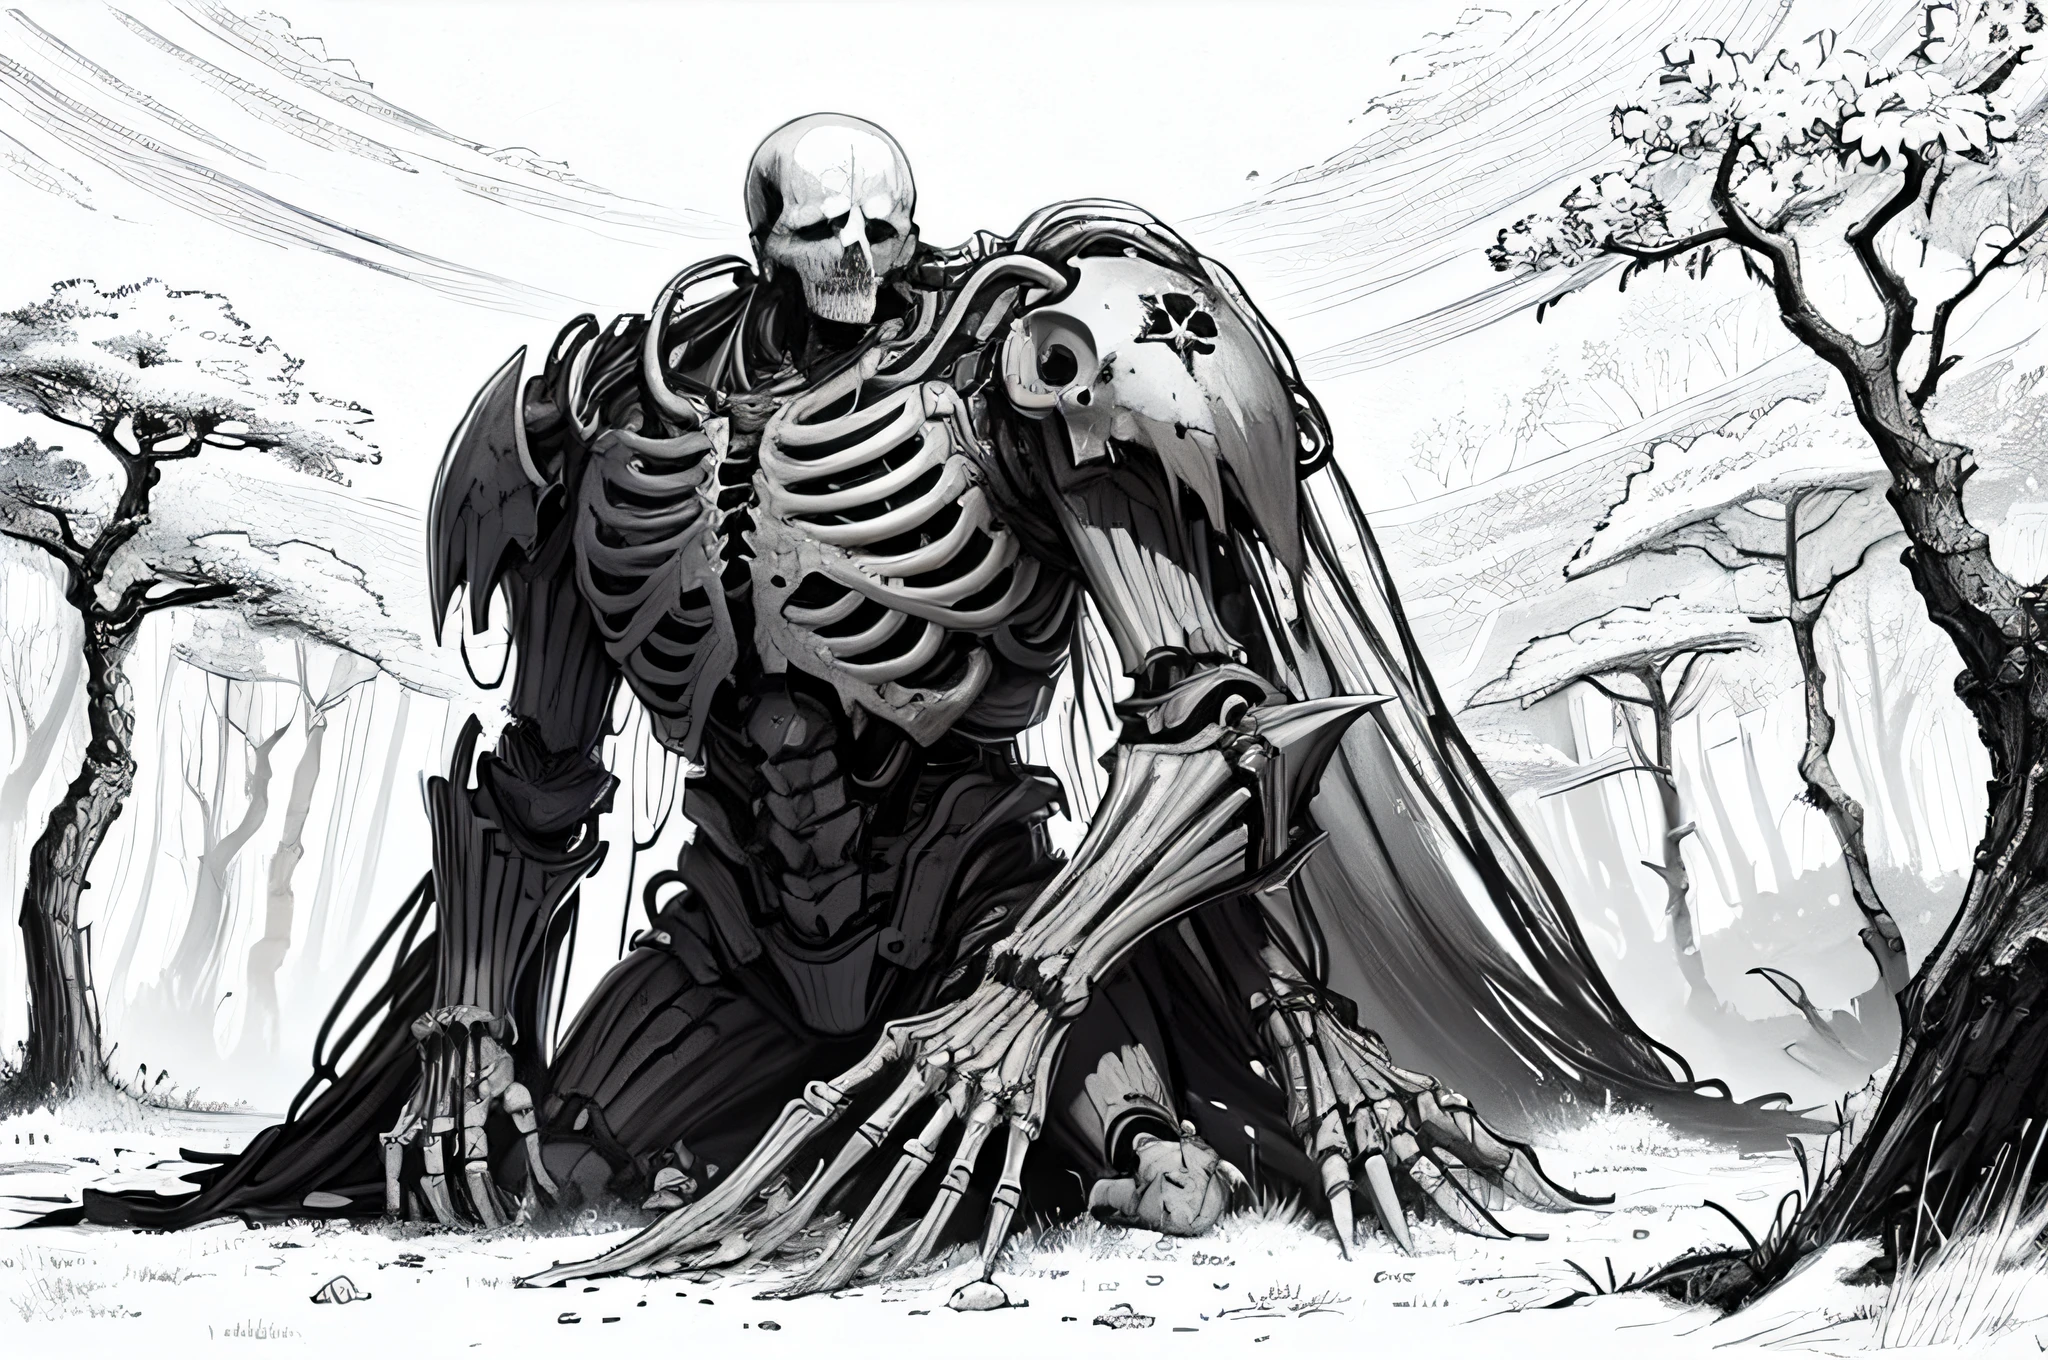 lineart, monochrome, sketch, undead warrior, edge of forest, concept art